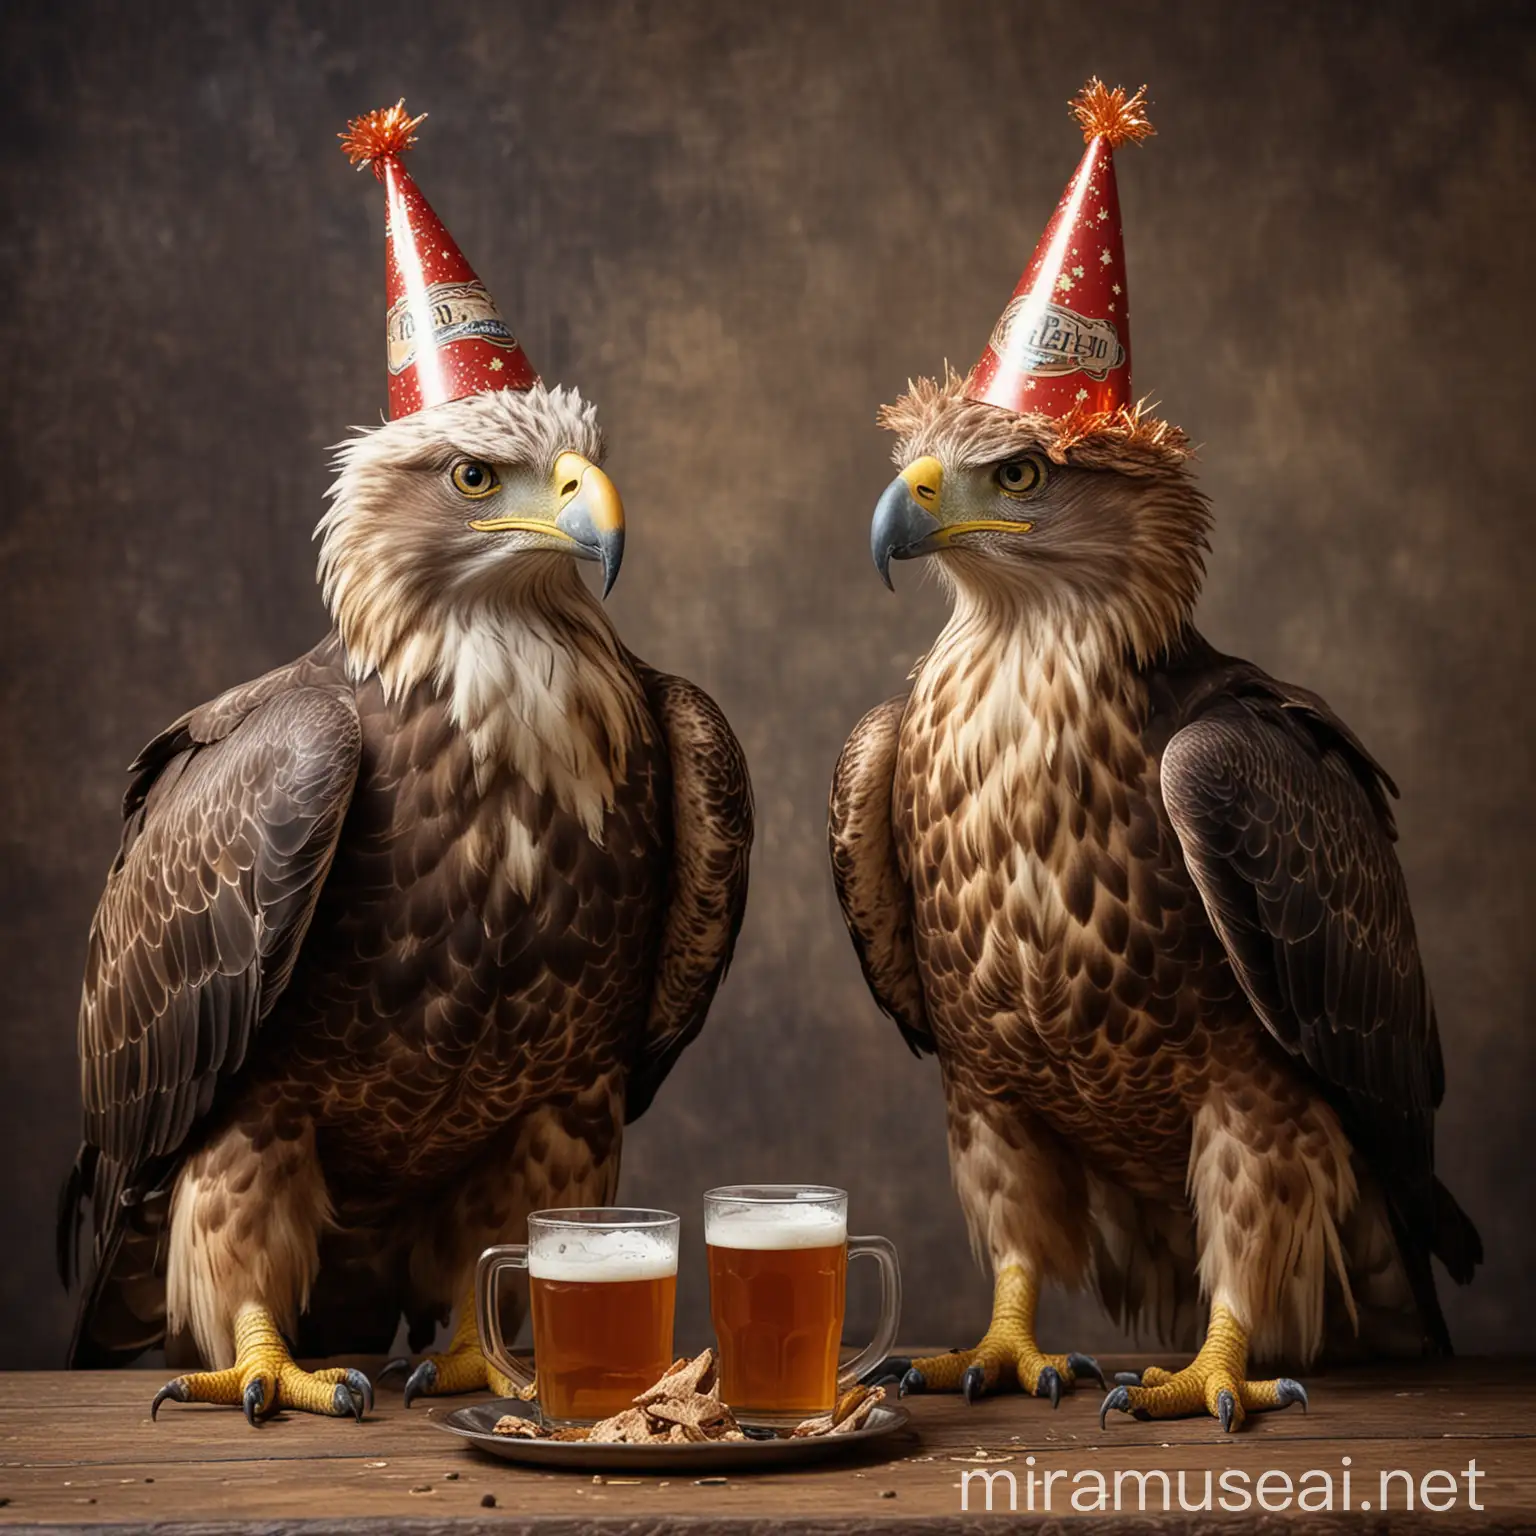 Celebrating the Birthday of an Old Eagle and Mature Hawk with Festive Party Hats and Beer